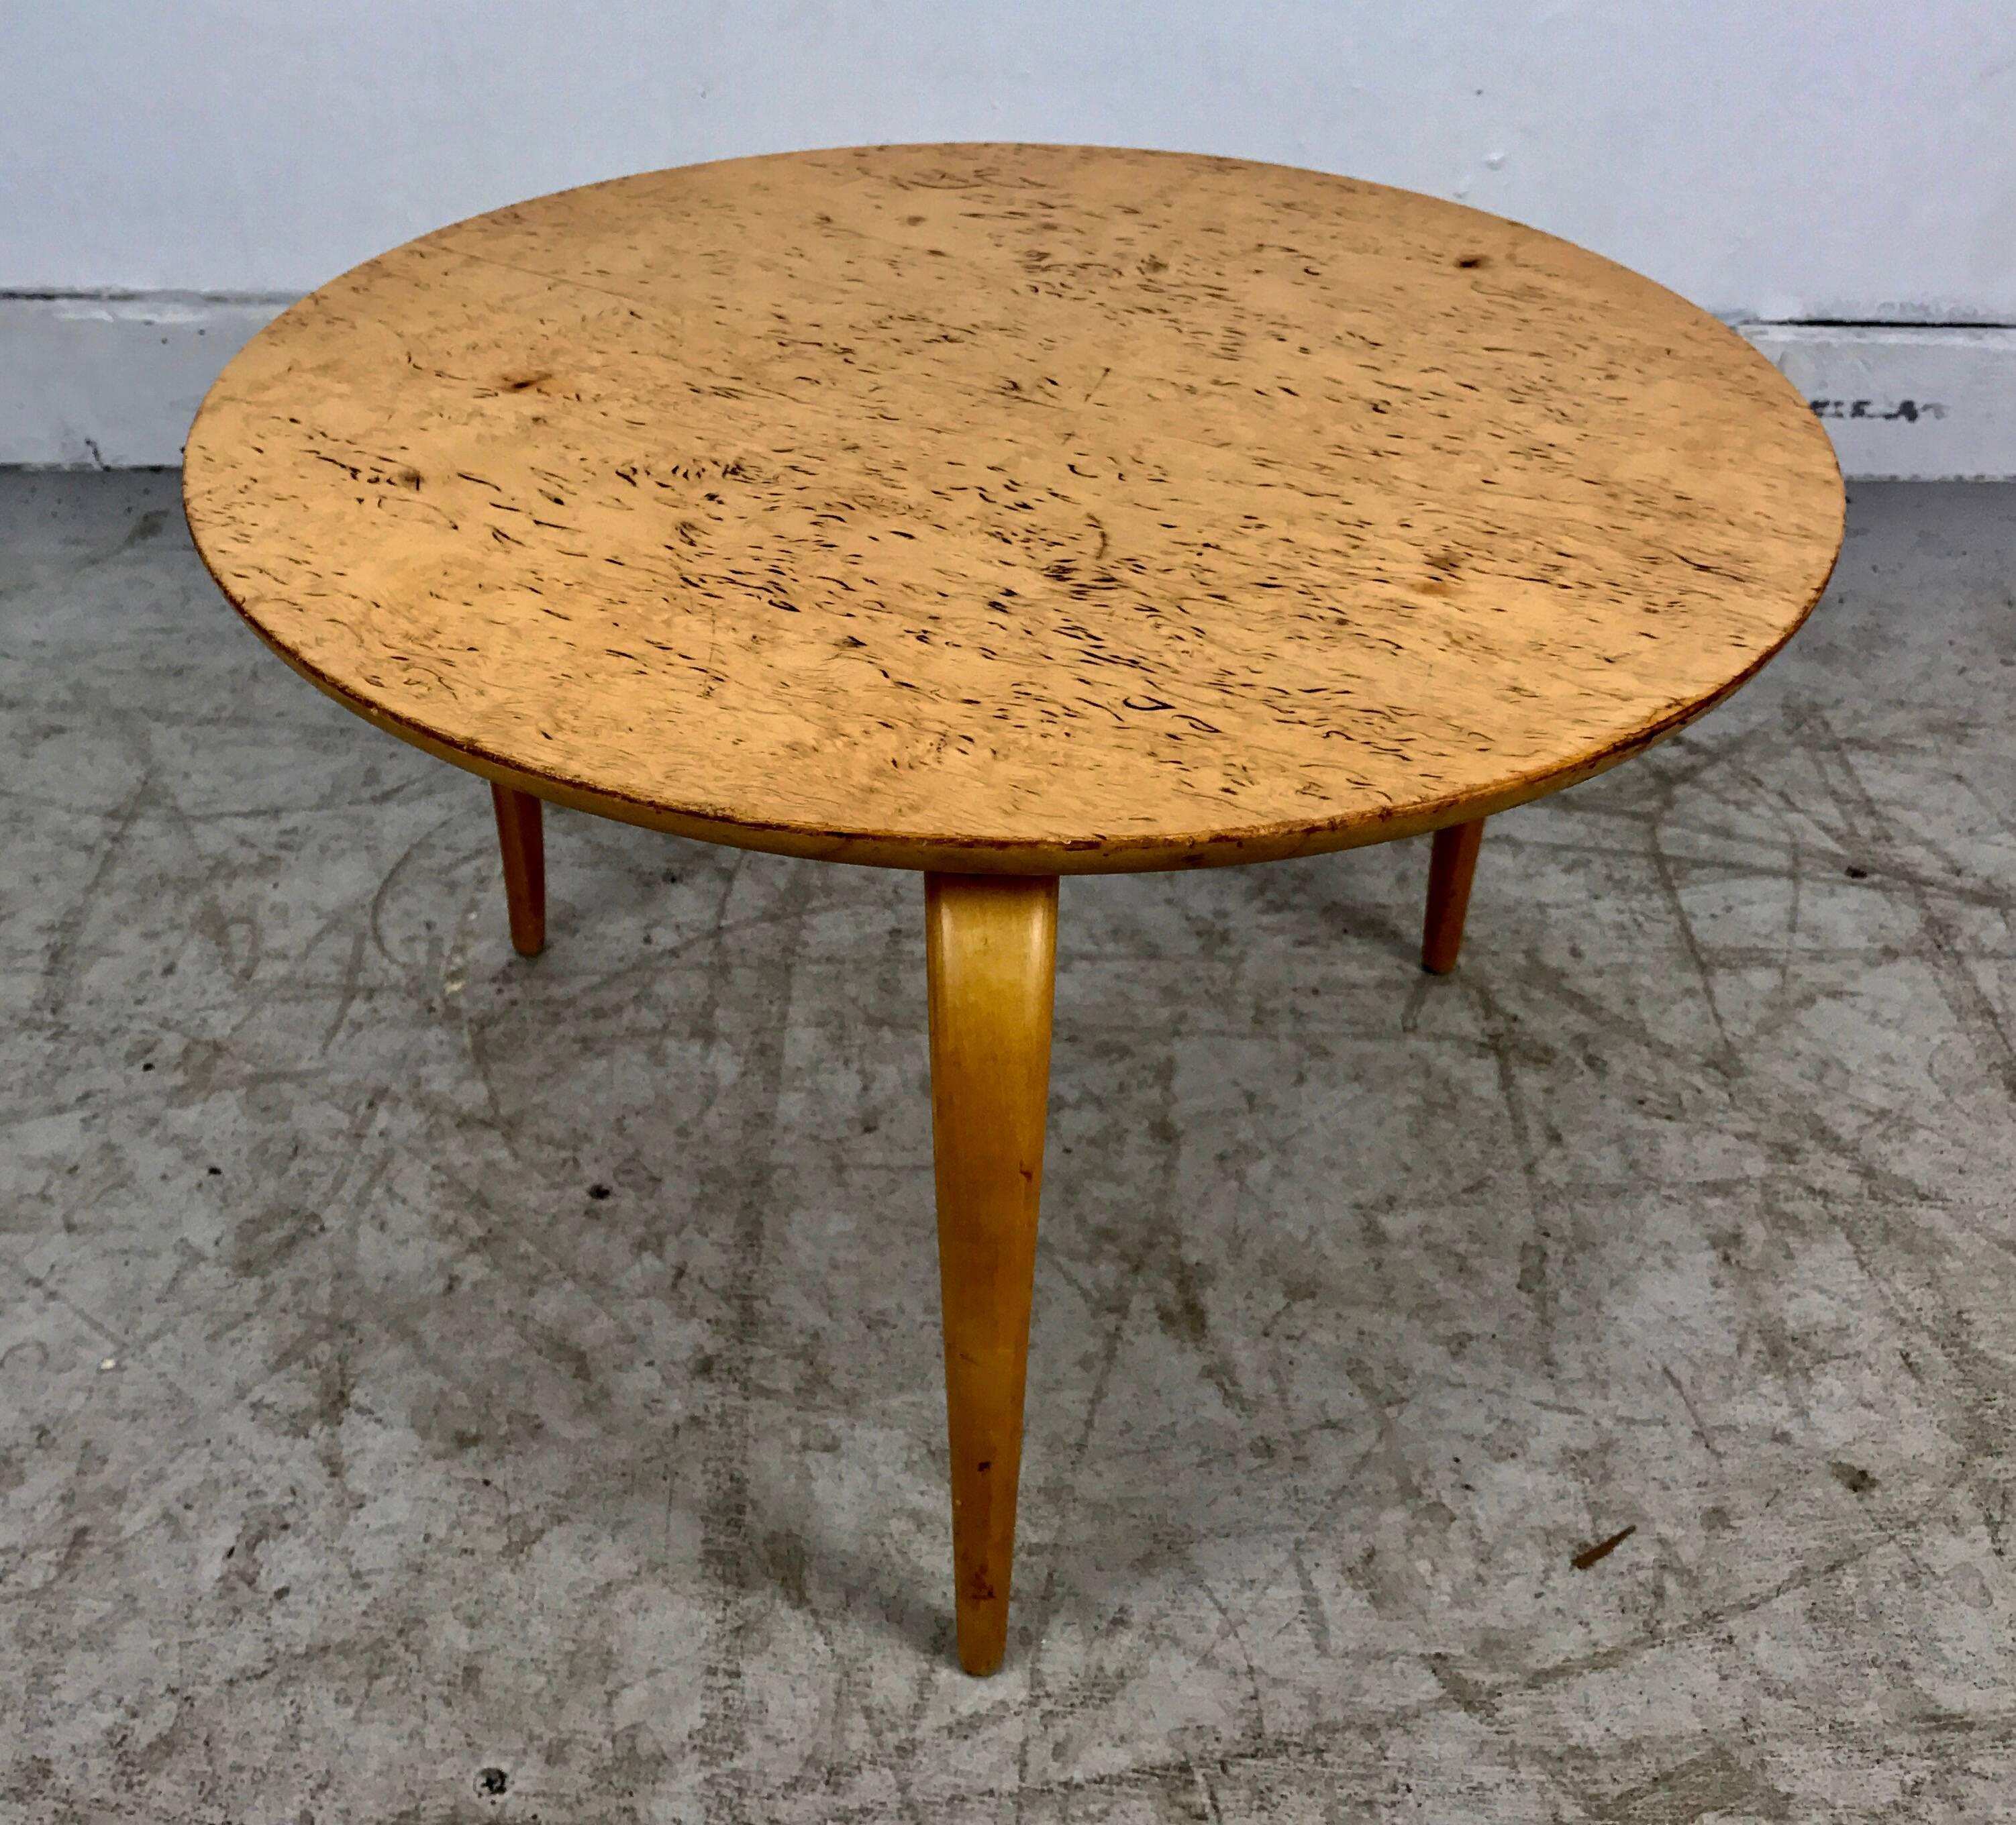 Early diminuitive occasional table designed by Bruno Mathsson, made in Sweden, retains original burn in Karl Mathsson label, circa 1940s. Original finish, age appropriate wear.